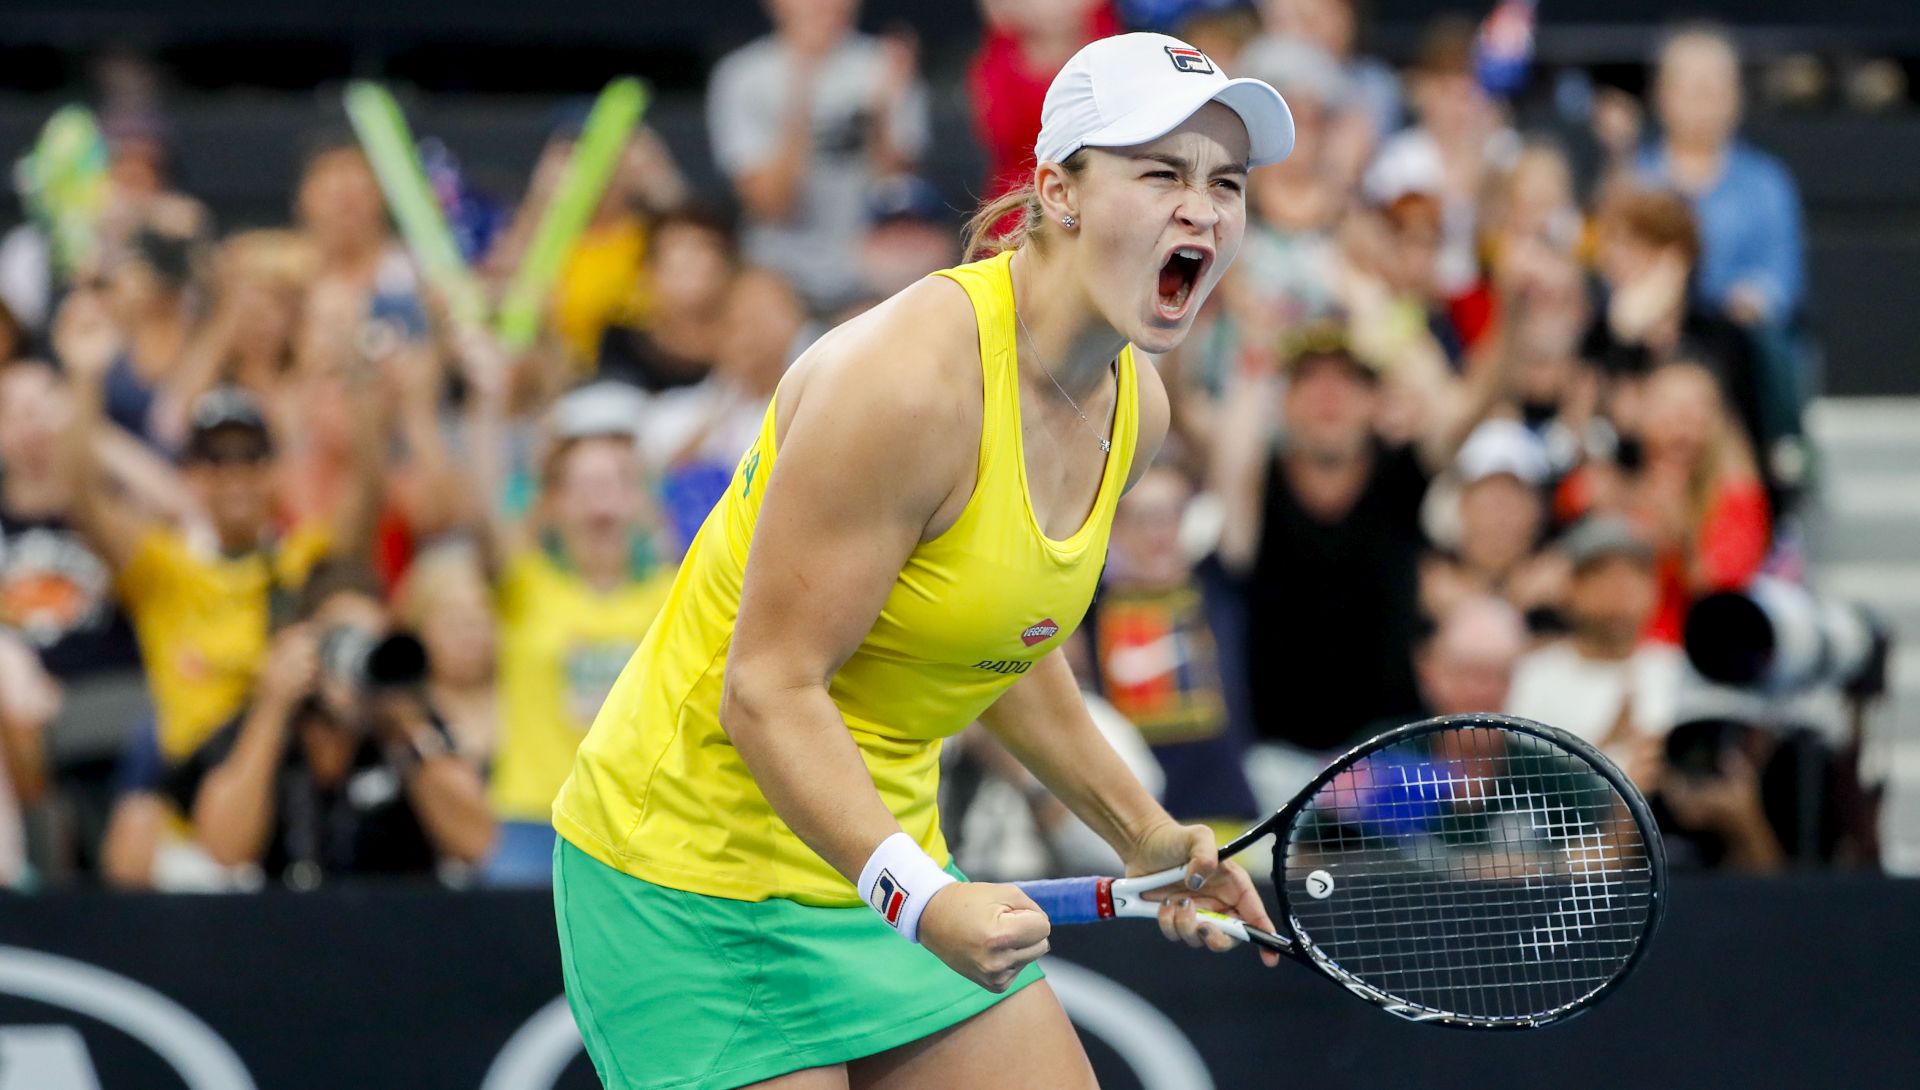 epa07518676 Ashleigh Barty of Australia celebrates her win against Aryna Sabalenka of Belarus during the Fed Cup tennis tournament World Group semifinal between Australia and Belarus at Pat Rafter Arena in Brisbane, Australia, 21 April 2019.  EPA/GLENN HUNT  AUSTRALIA AND NEW ZEALAND OUT